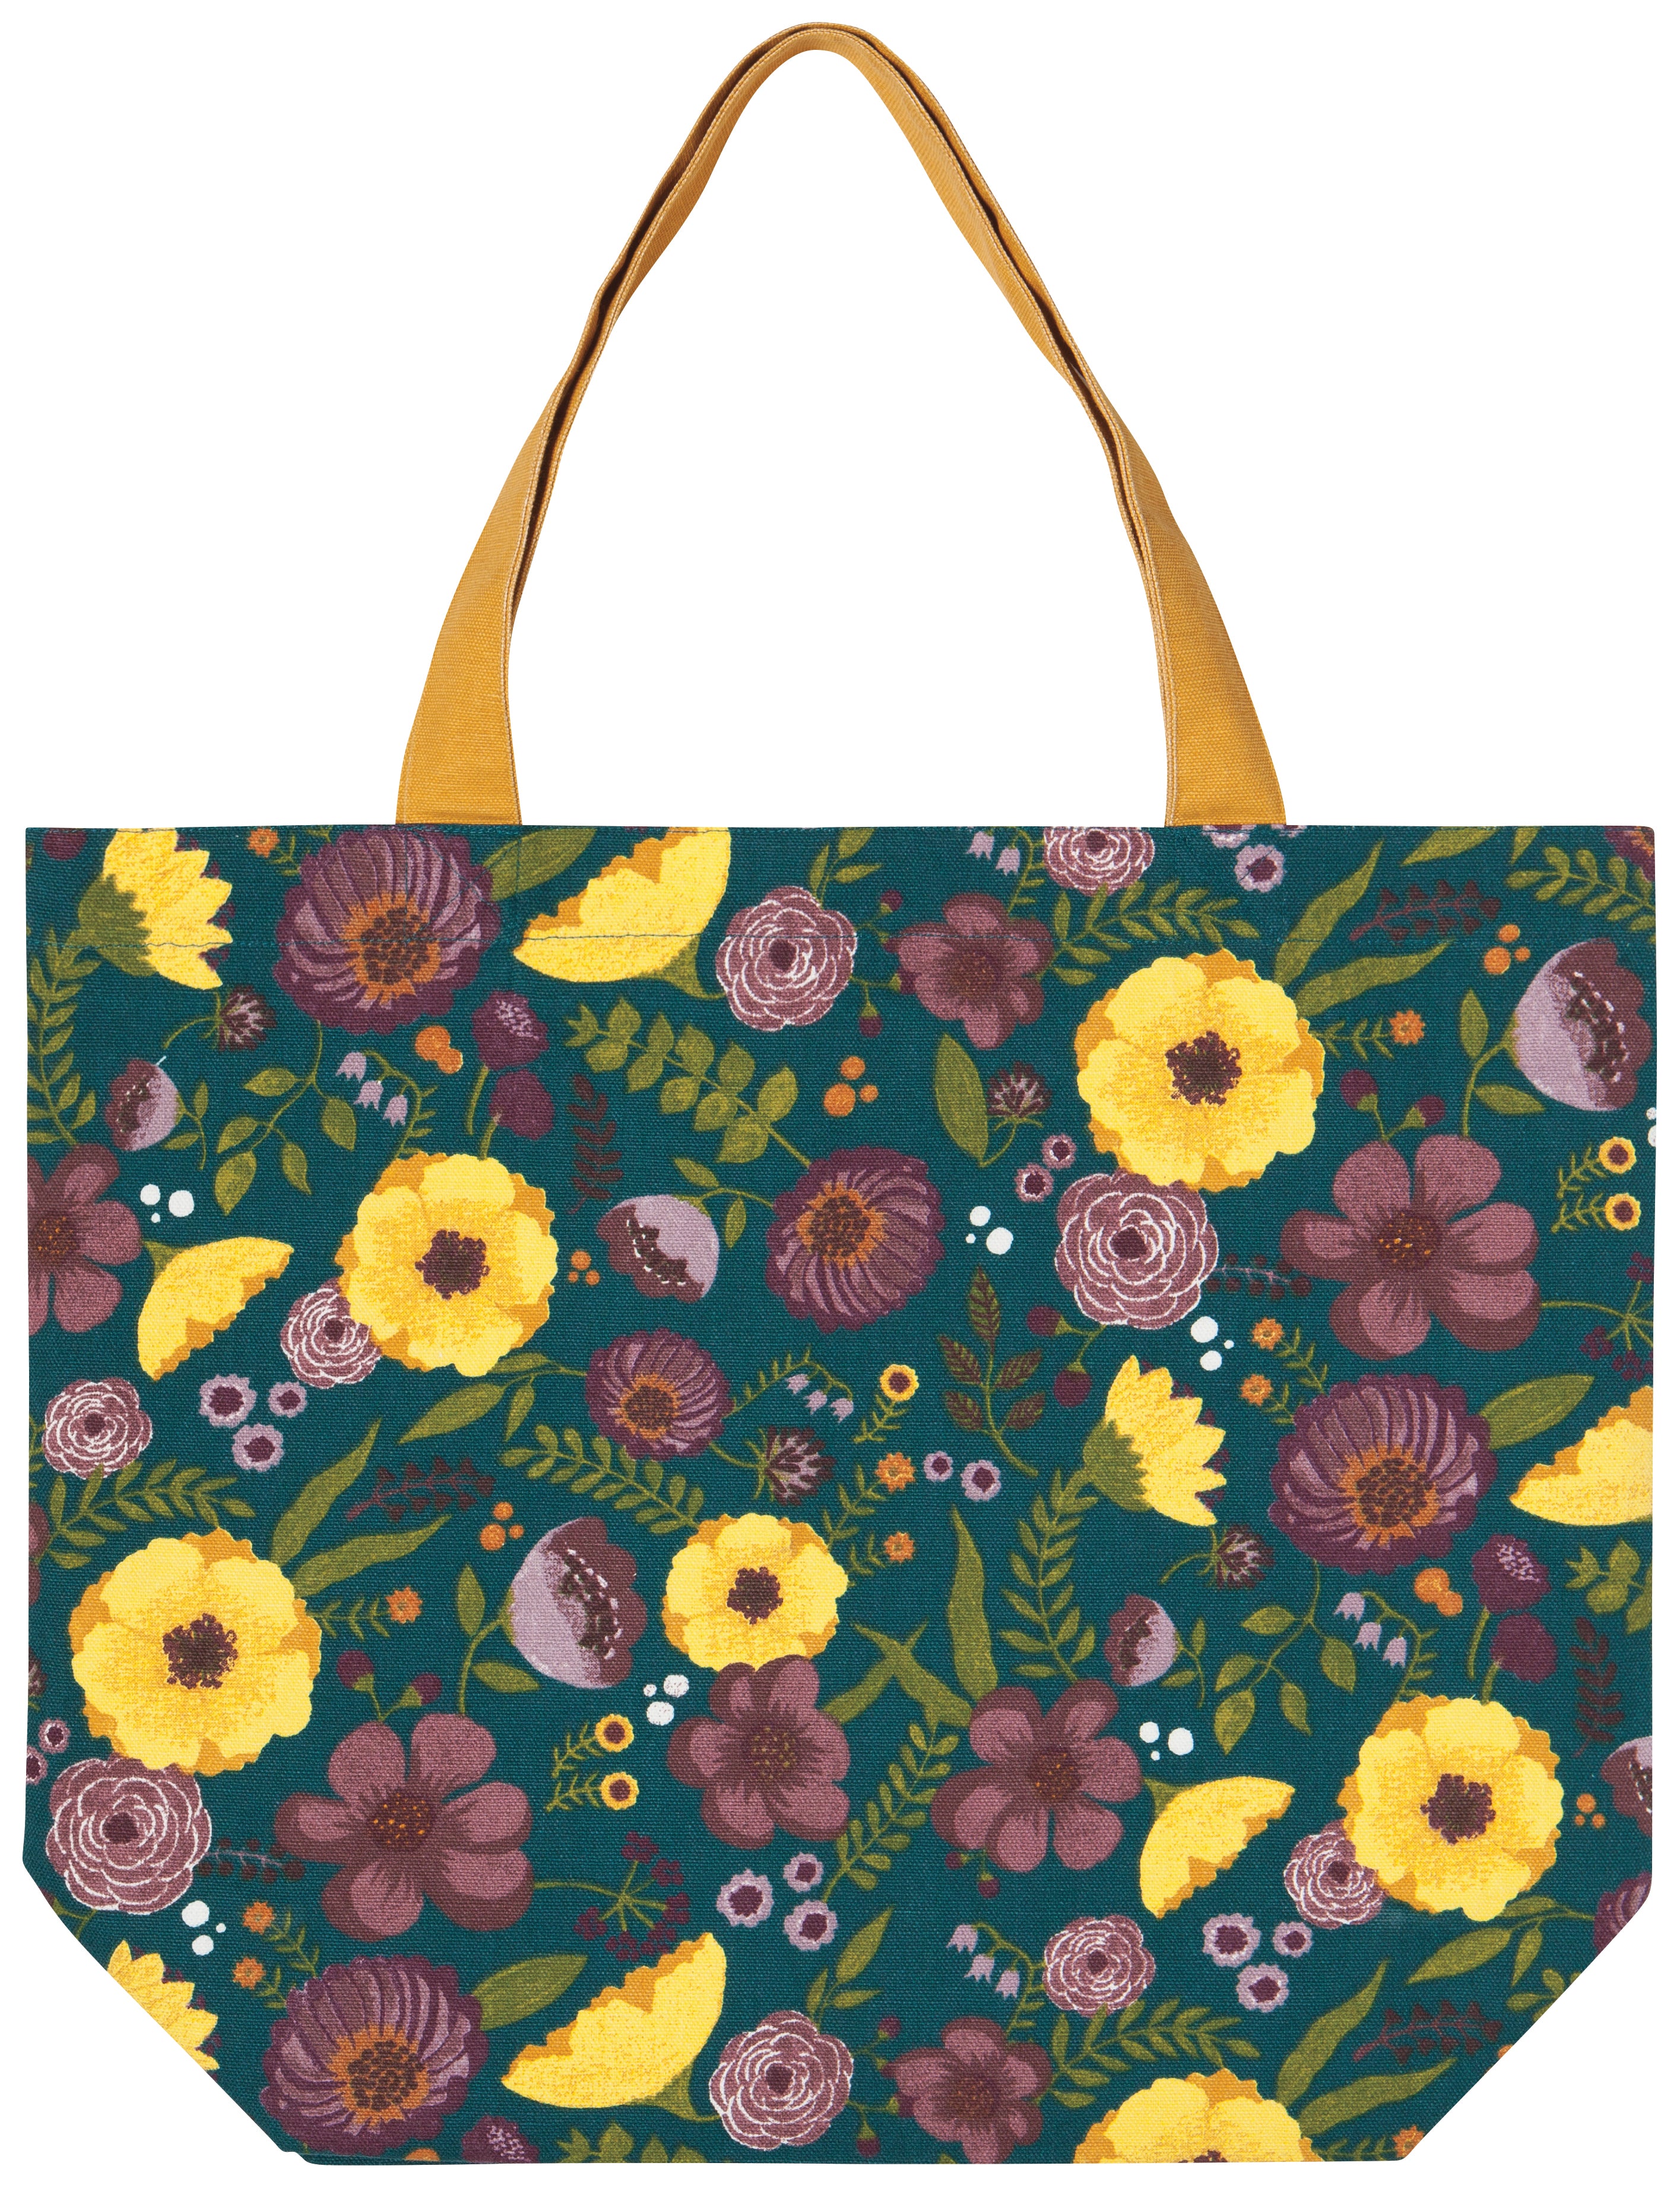 dark green tote bag with yellow handles, yellow and purple flowers with green stems